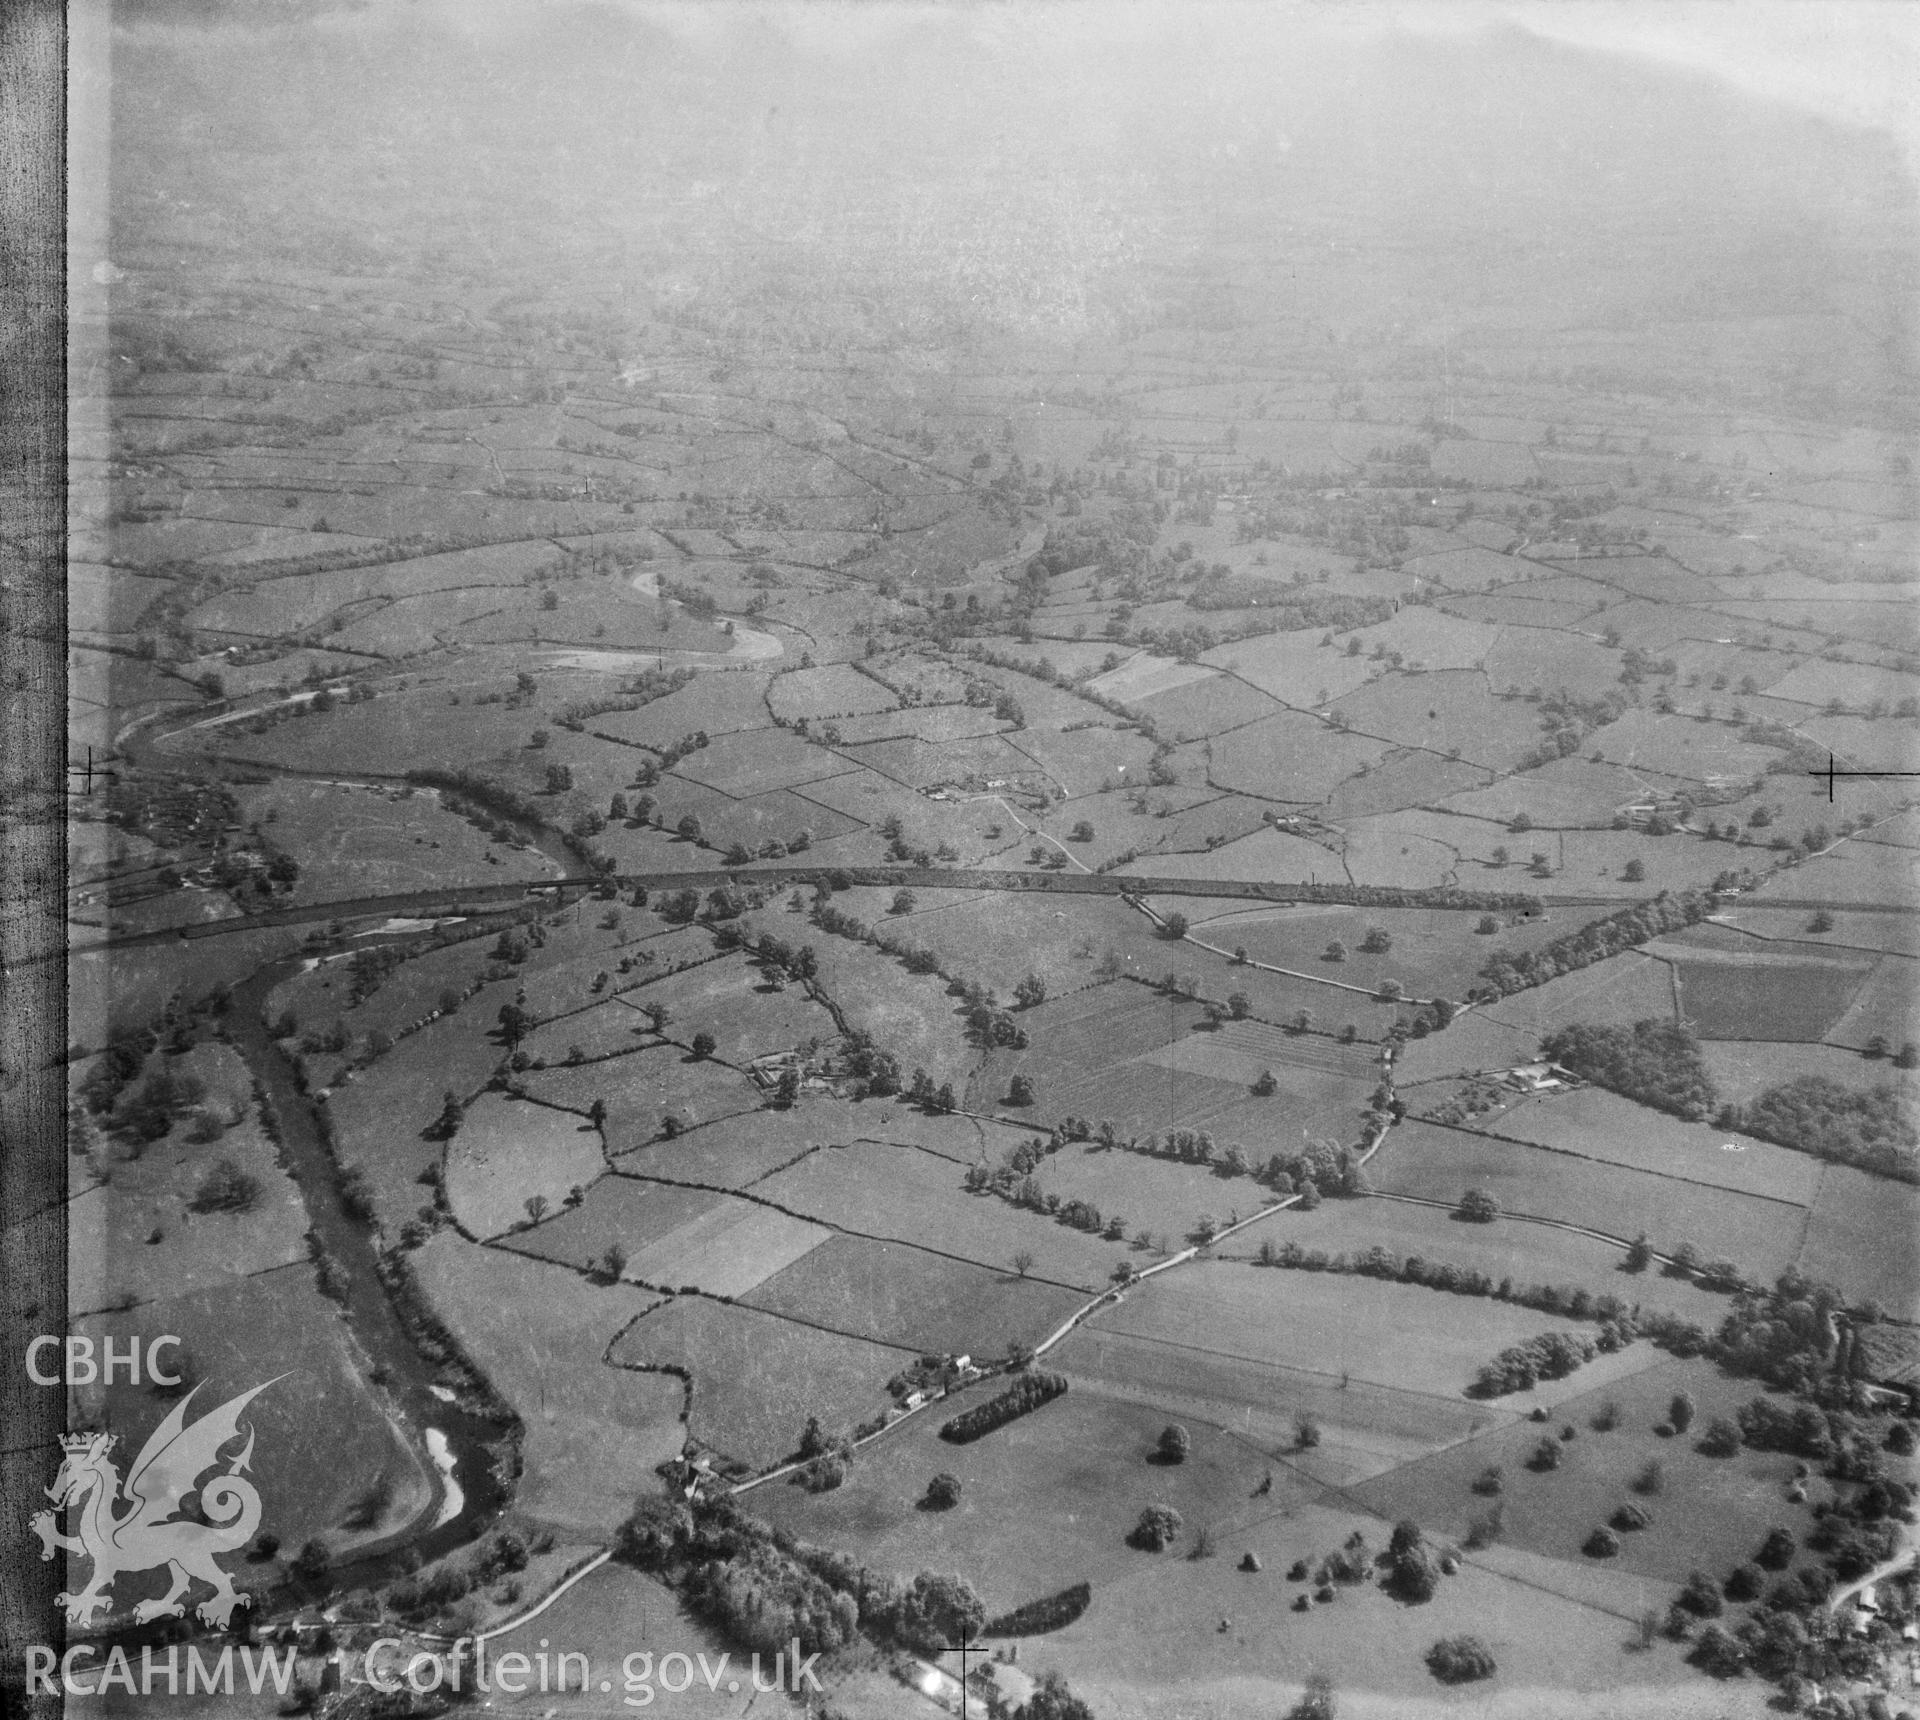 View of landscape south of Abergavenny showing the railway and river Usk